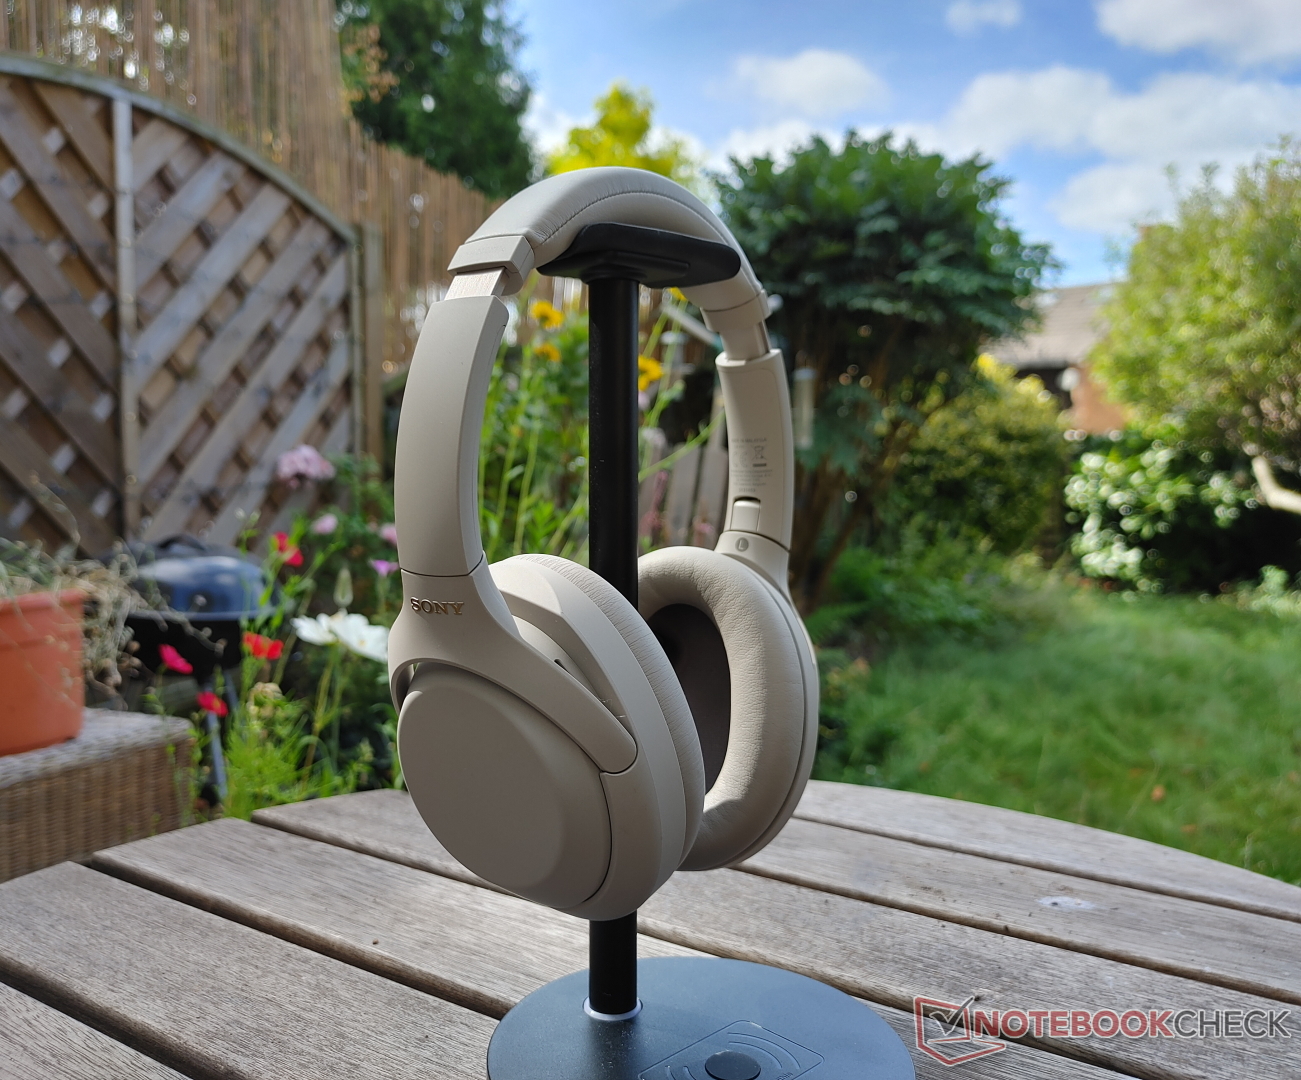 Sony WH-1000XM4: First Impressions with an underwhelming upgrade -   News